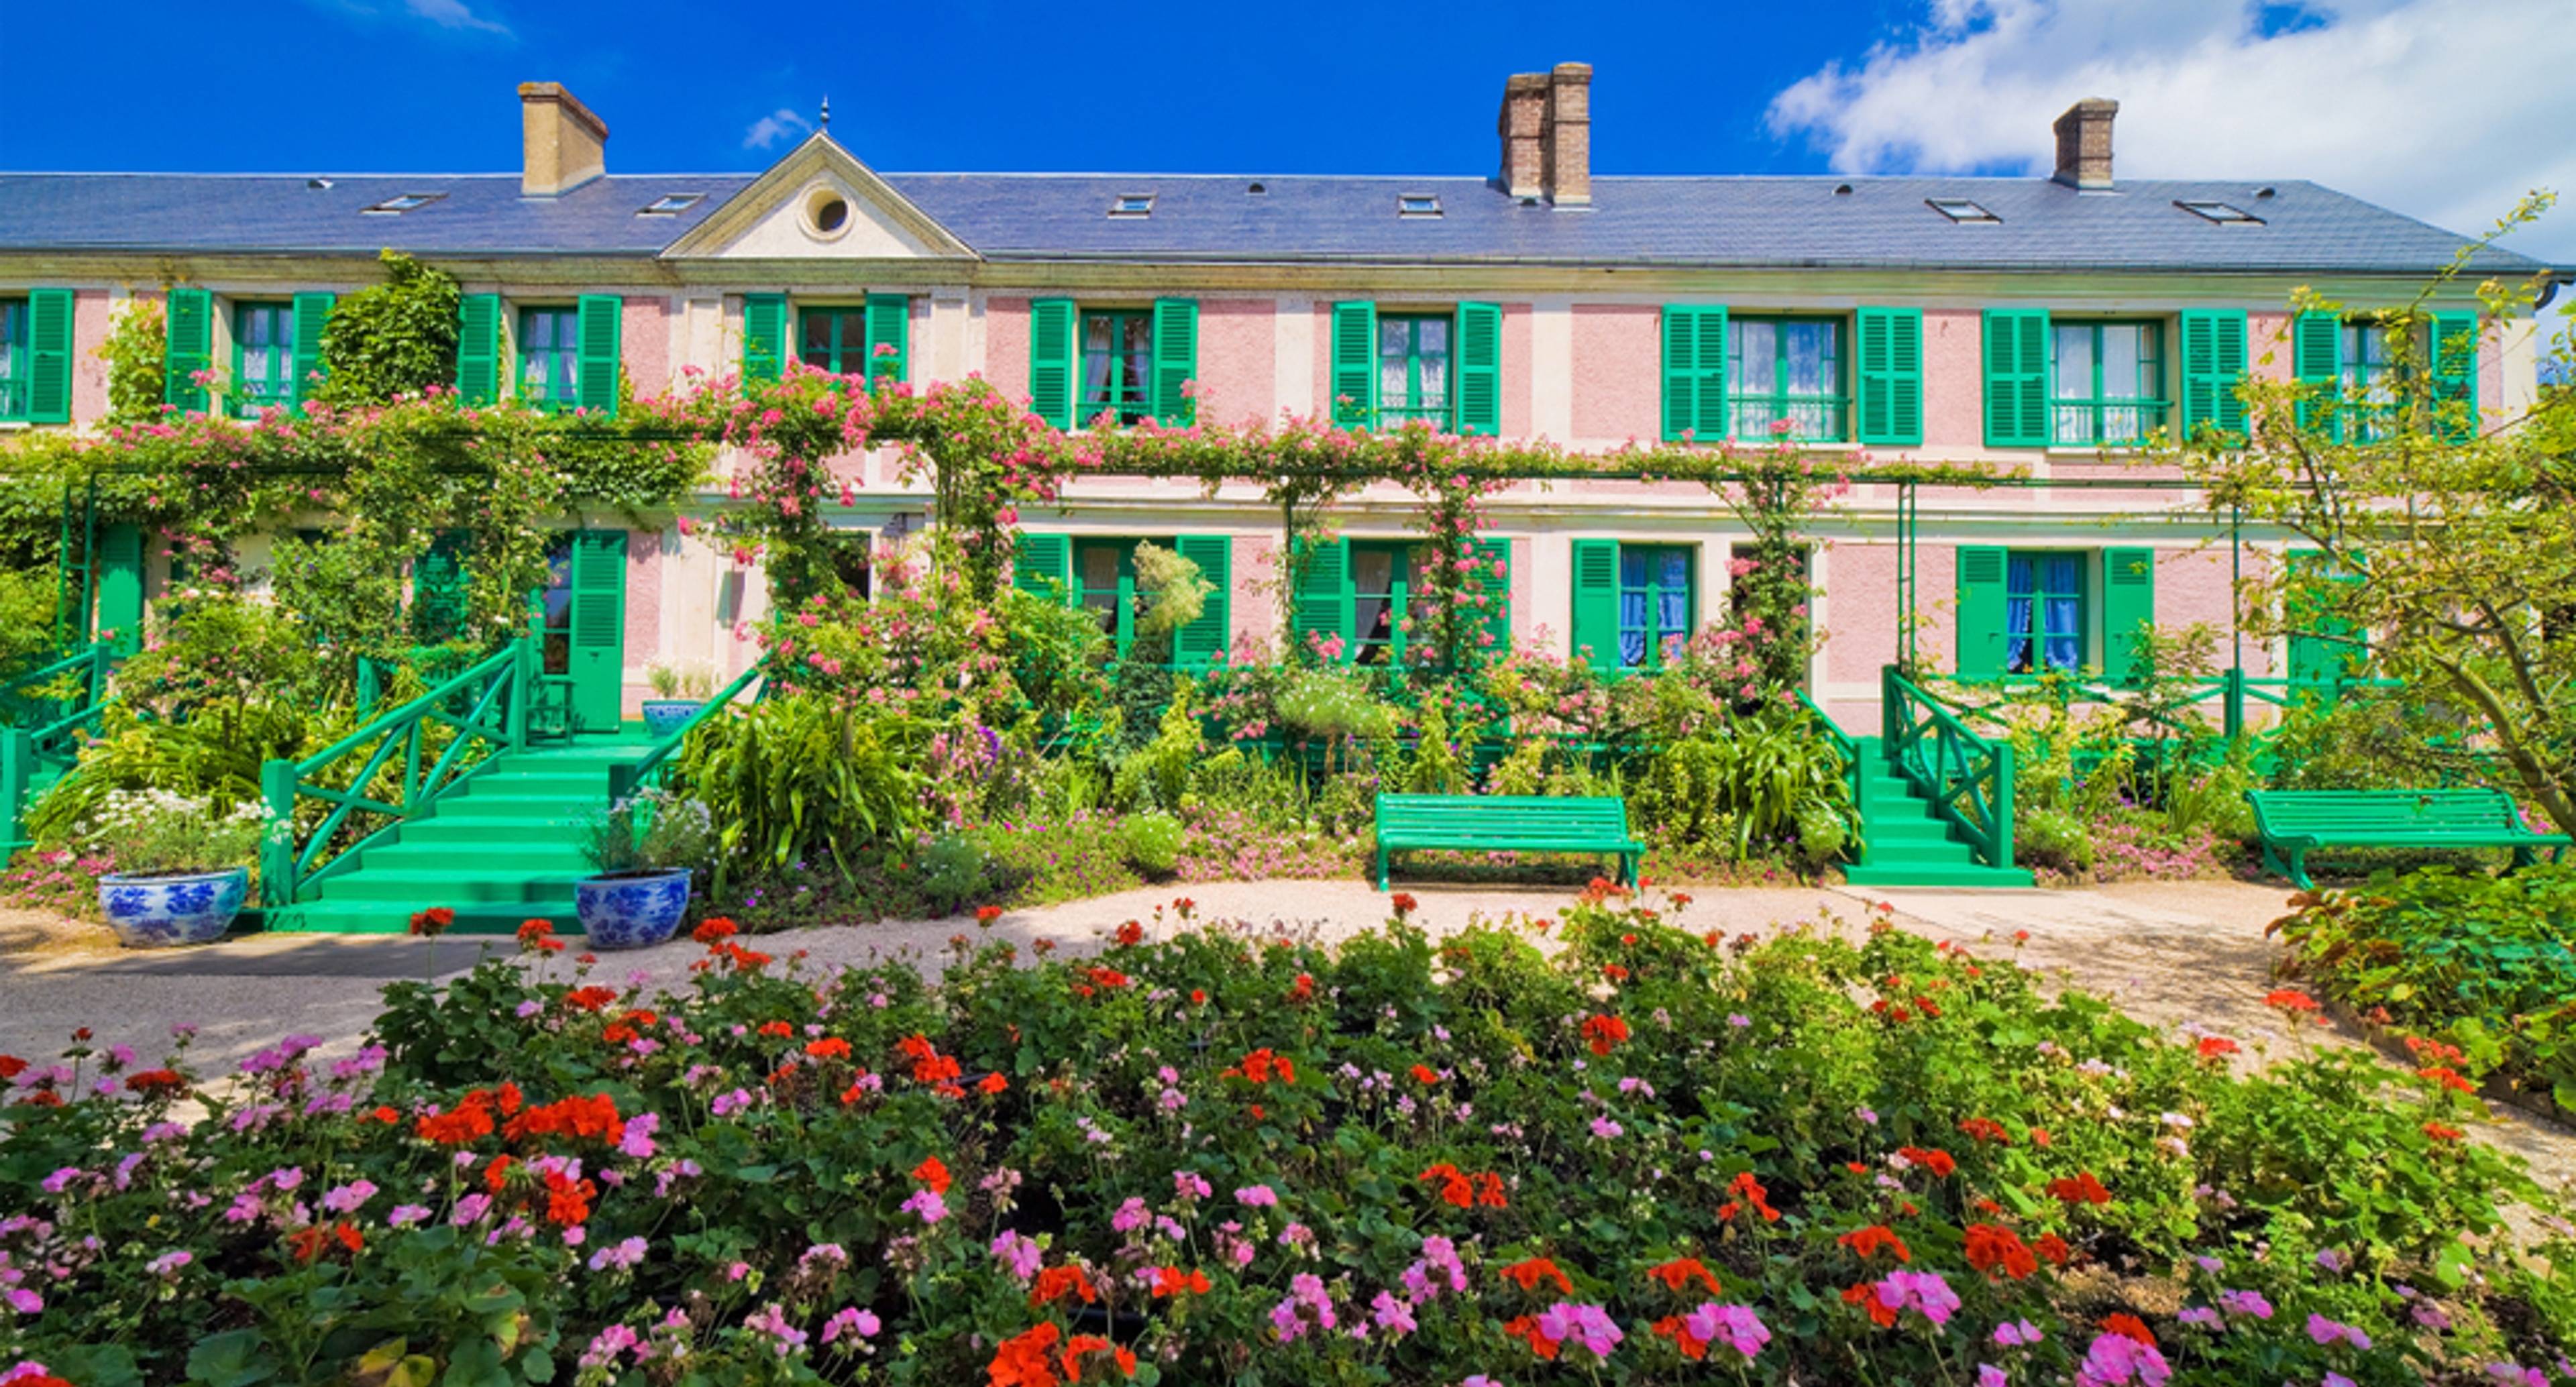 Exploring Giverny, the House and Gardens of Monet